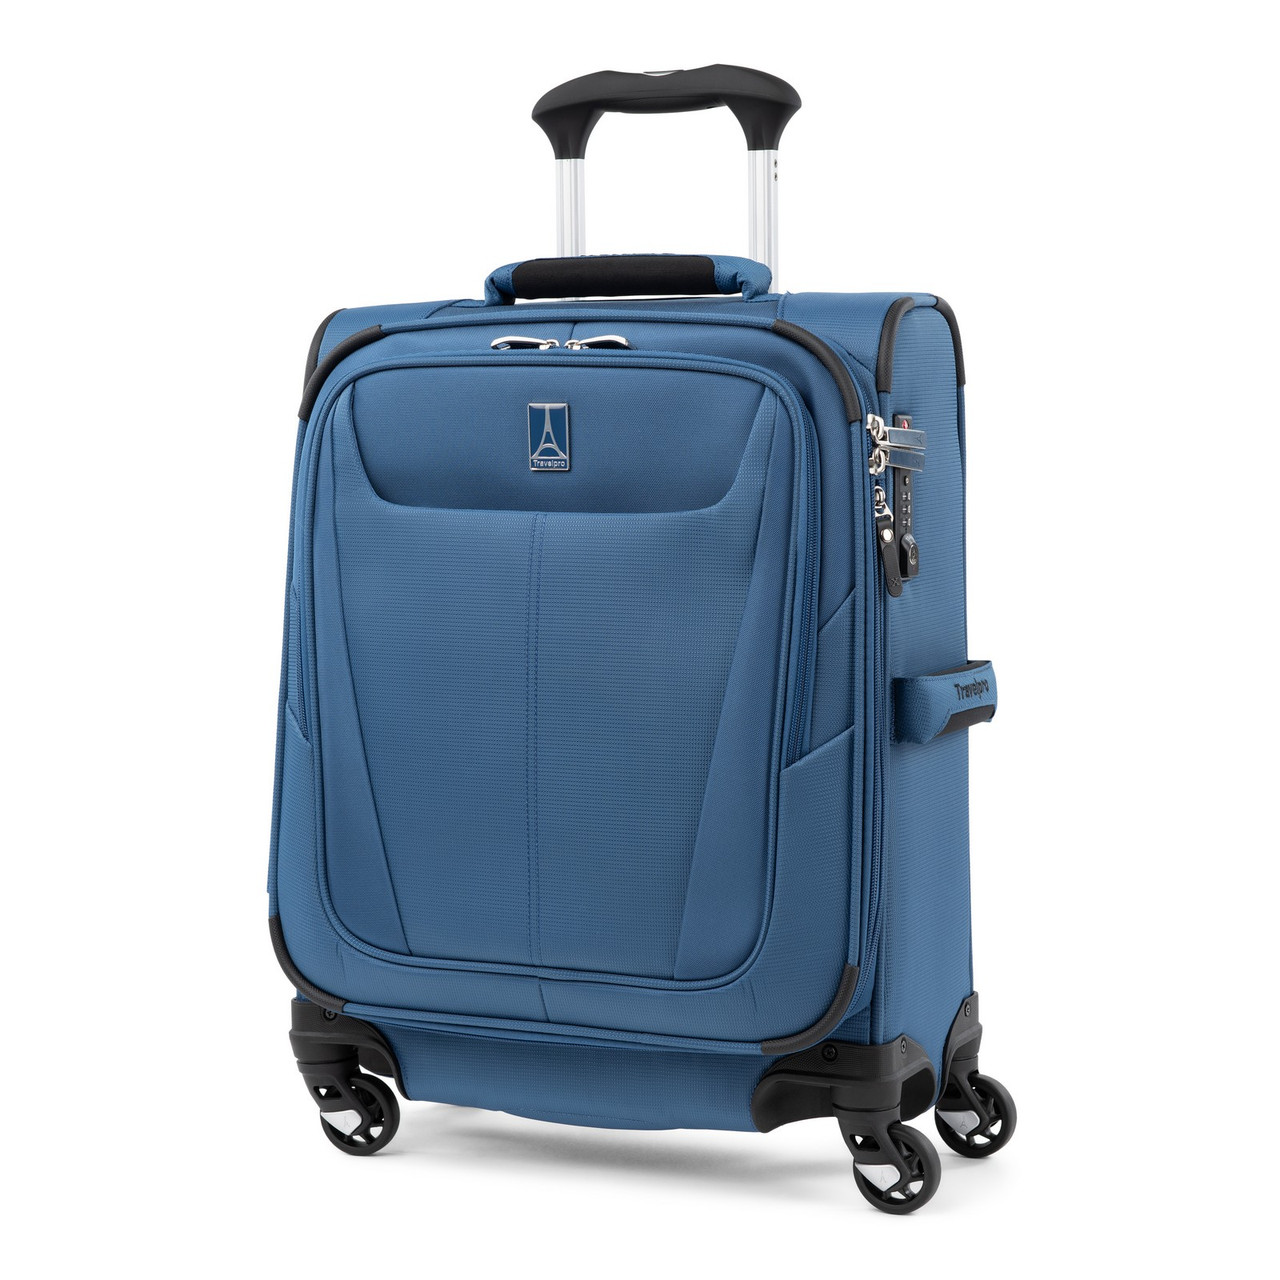 This Luggage Set Is The One Flight Attendants Use Most | lupon.gov.ph